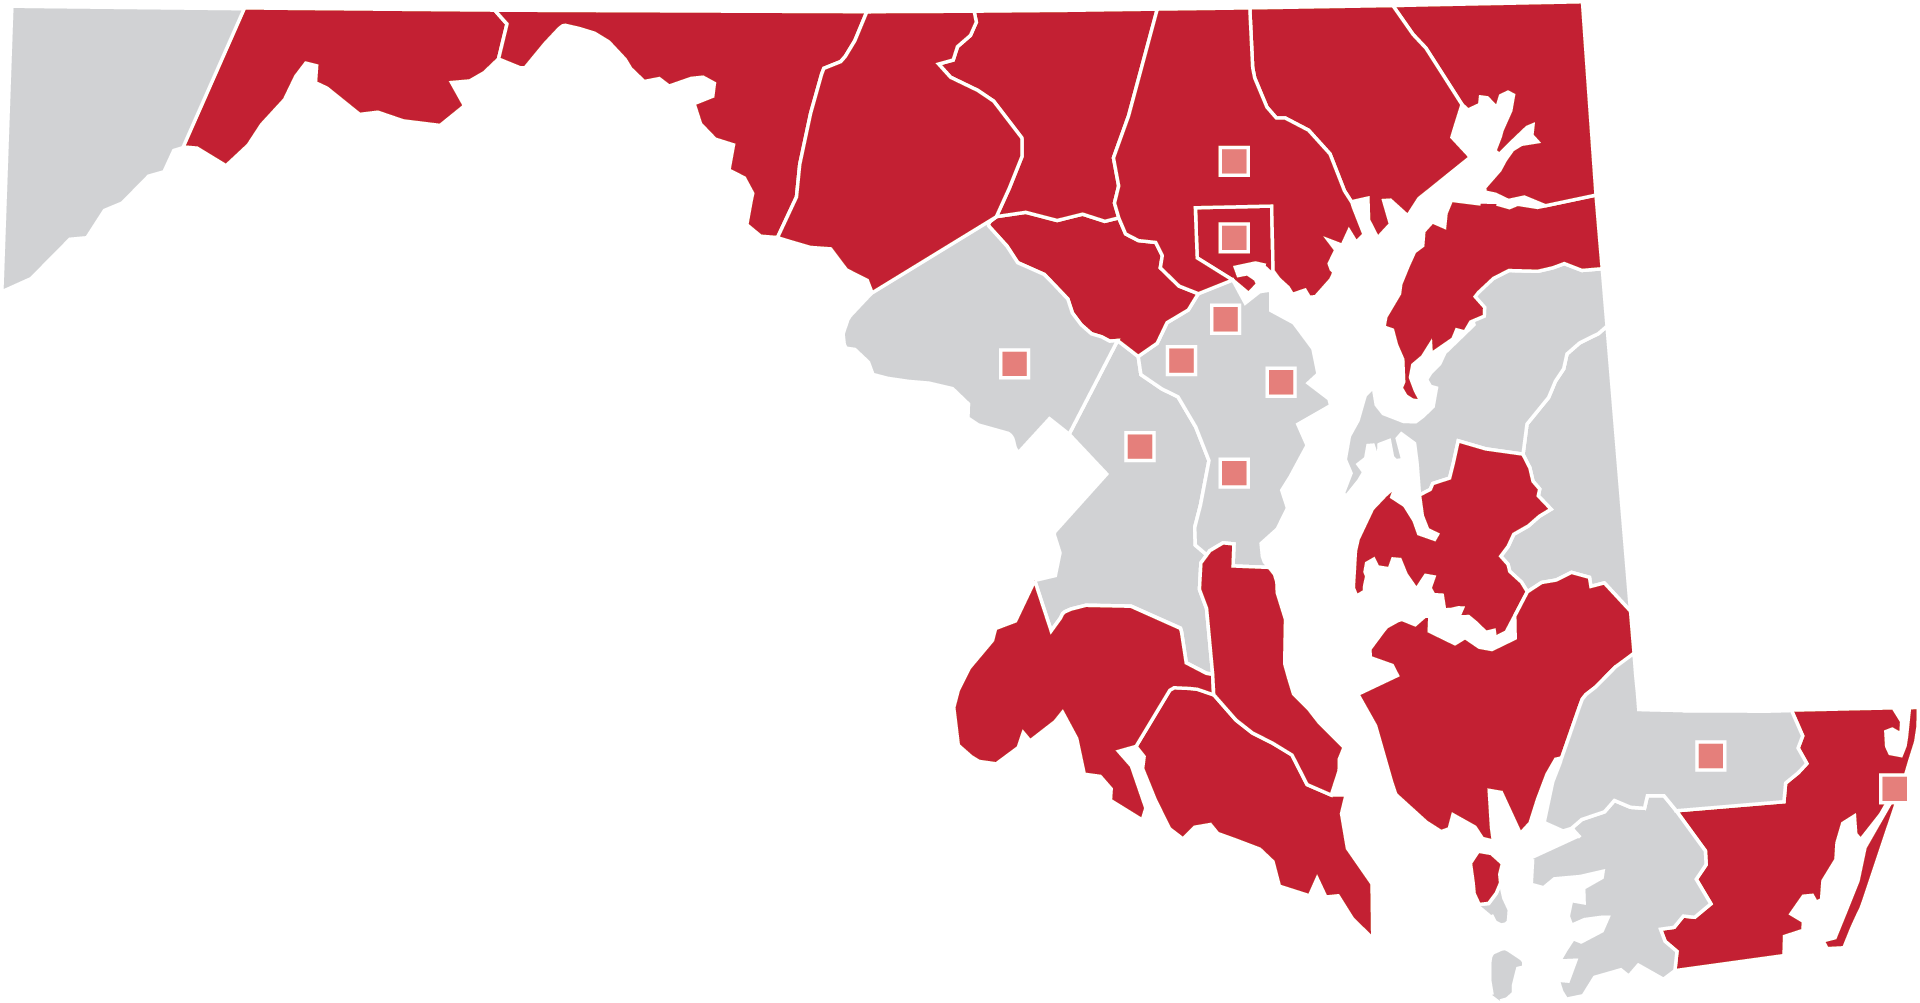 Map of Maryland counties; counties with a participating local or regional chamber who are members of the Maryland Chamber Federation are highlighted in red or with salmon-colored squares.